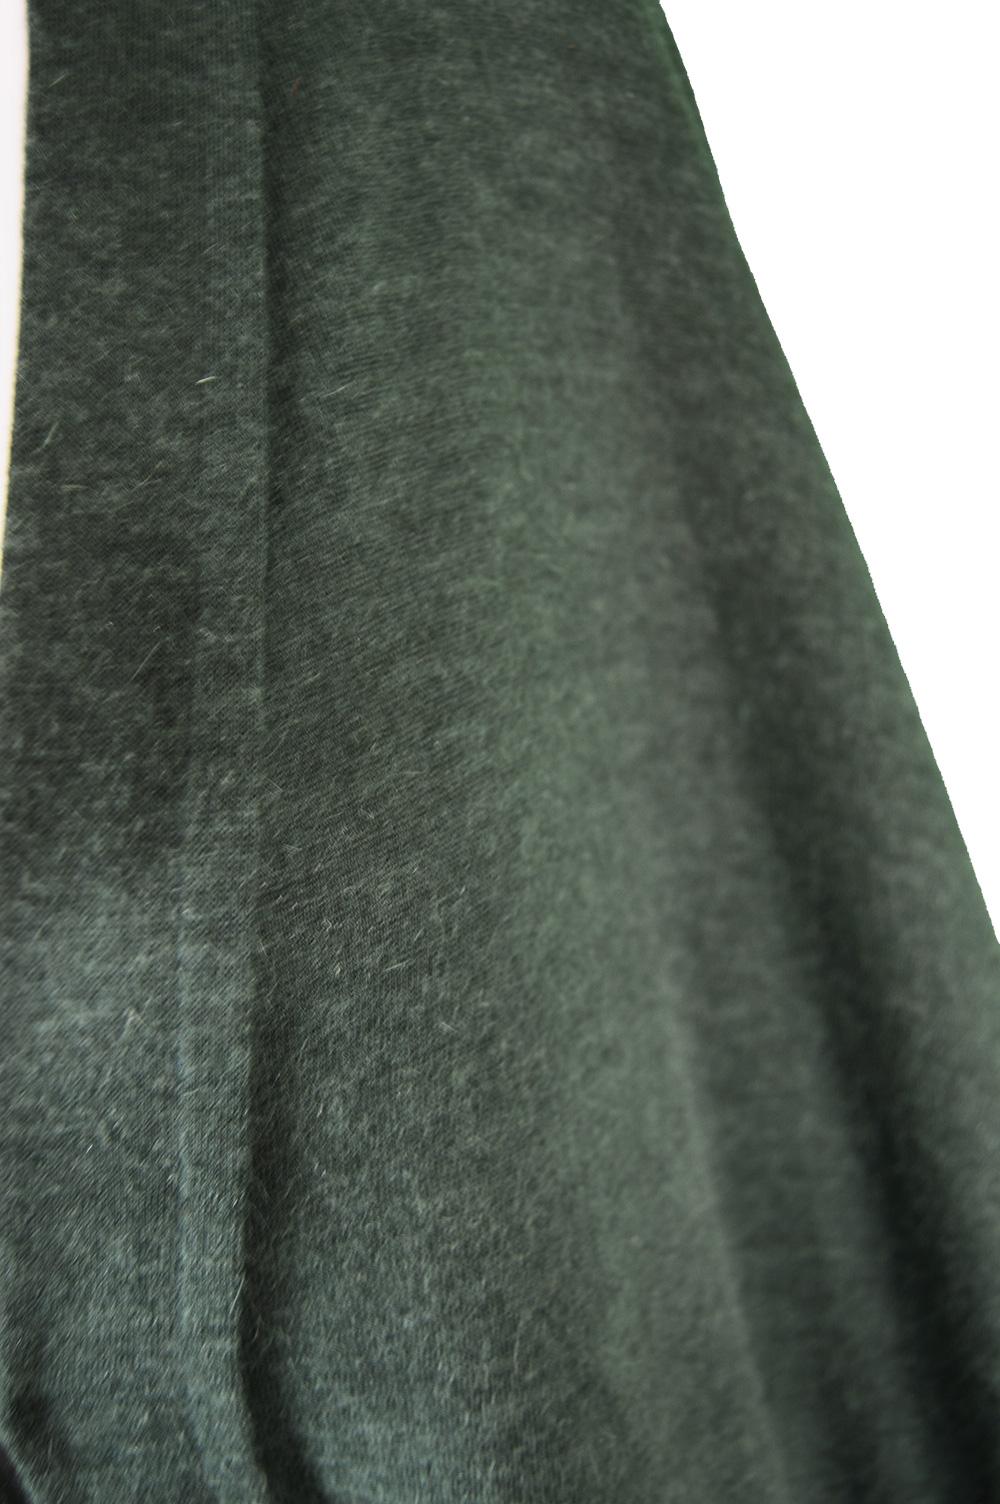 Gray Lanvin Haute Couture Unstructured Green Wool Knit Maxi Cape Cloak, 1970s For Sale